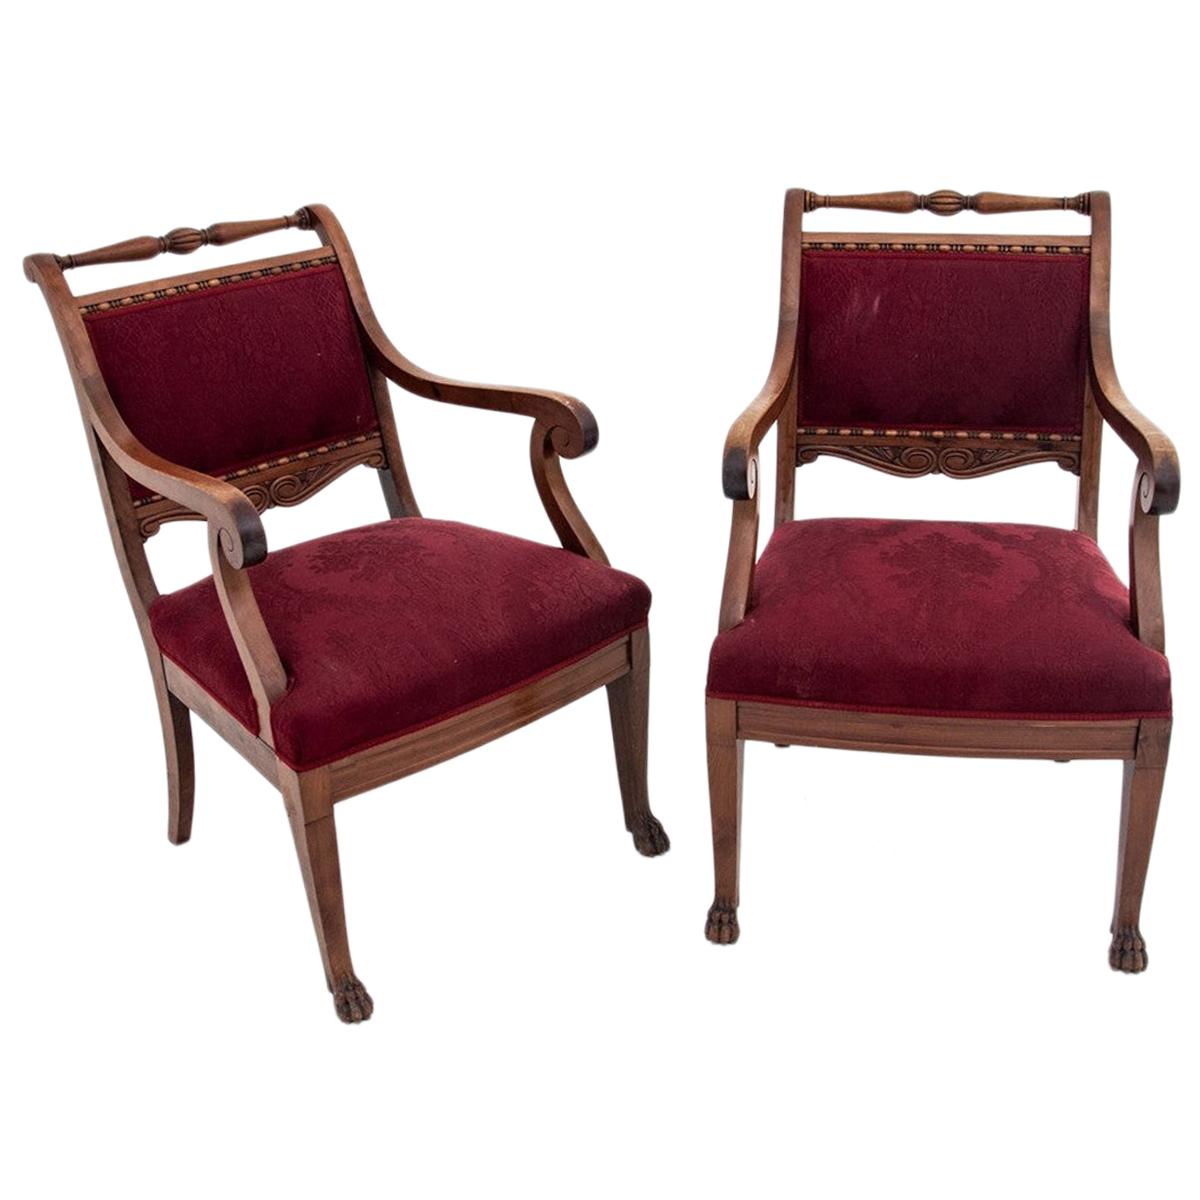 Two Eclectic Antique Red Armchairs 